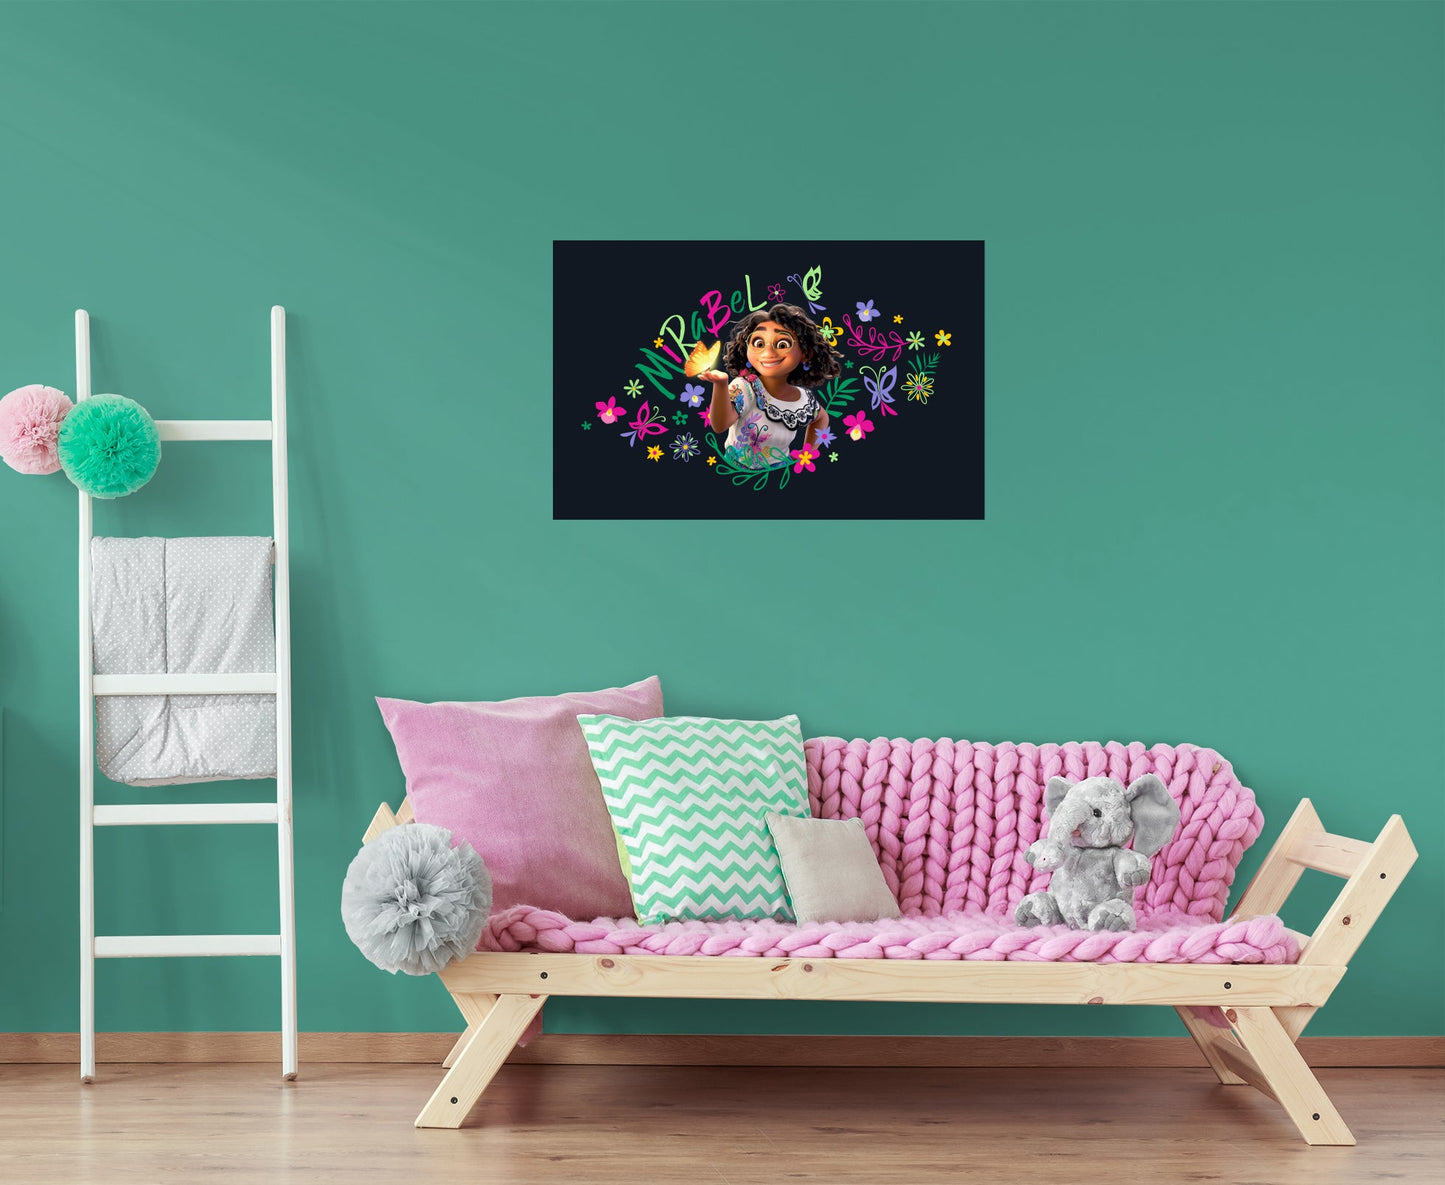 Encanto: Mirabel Glowing Butterfly Poster - Officially Licensed Disney Removable Adhesive Decal